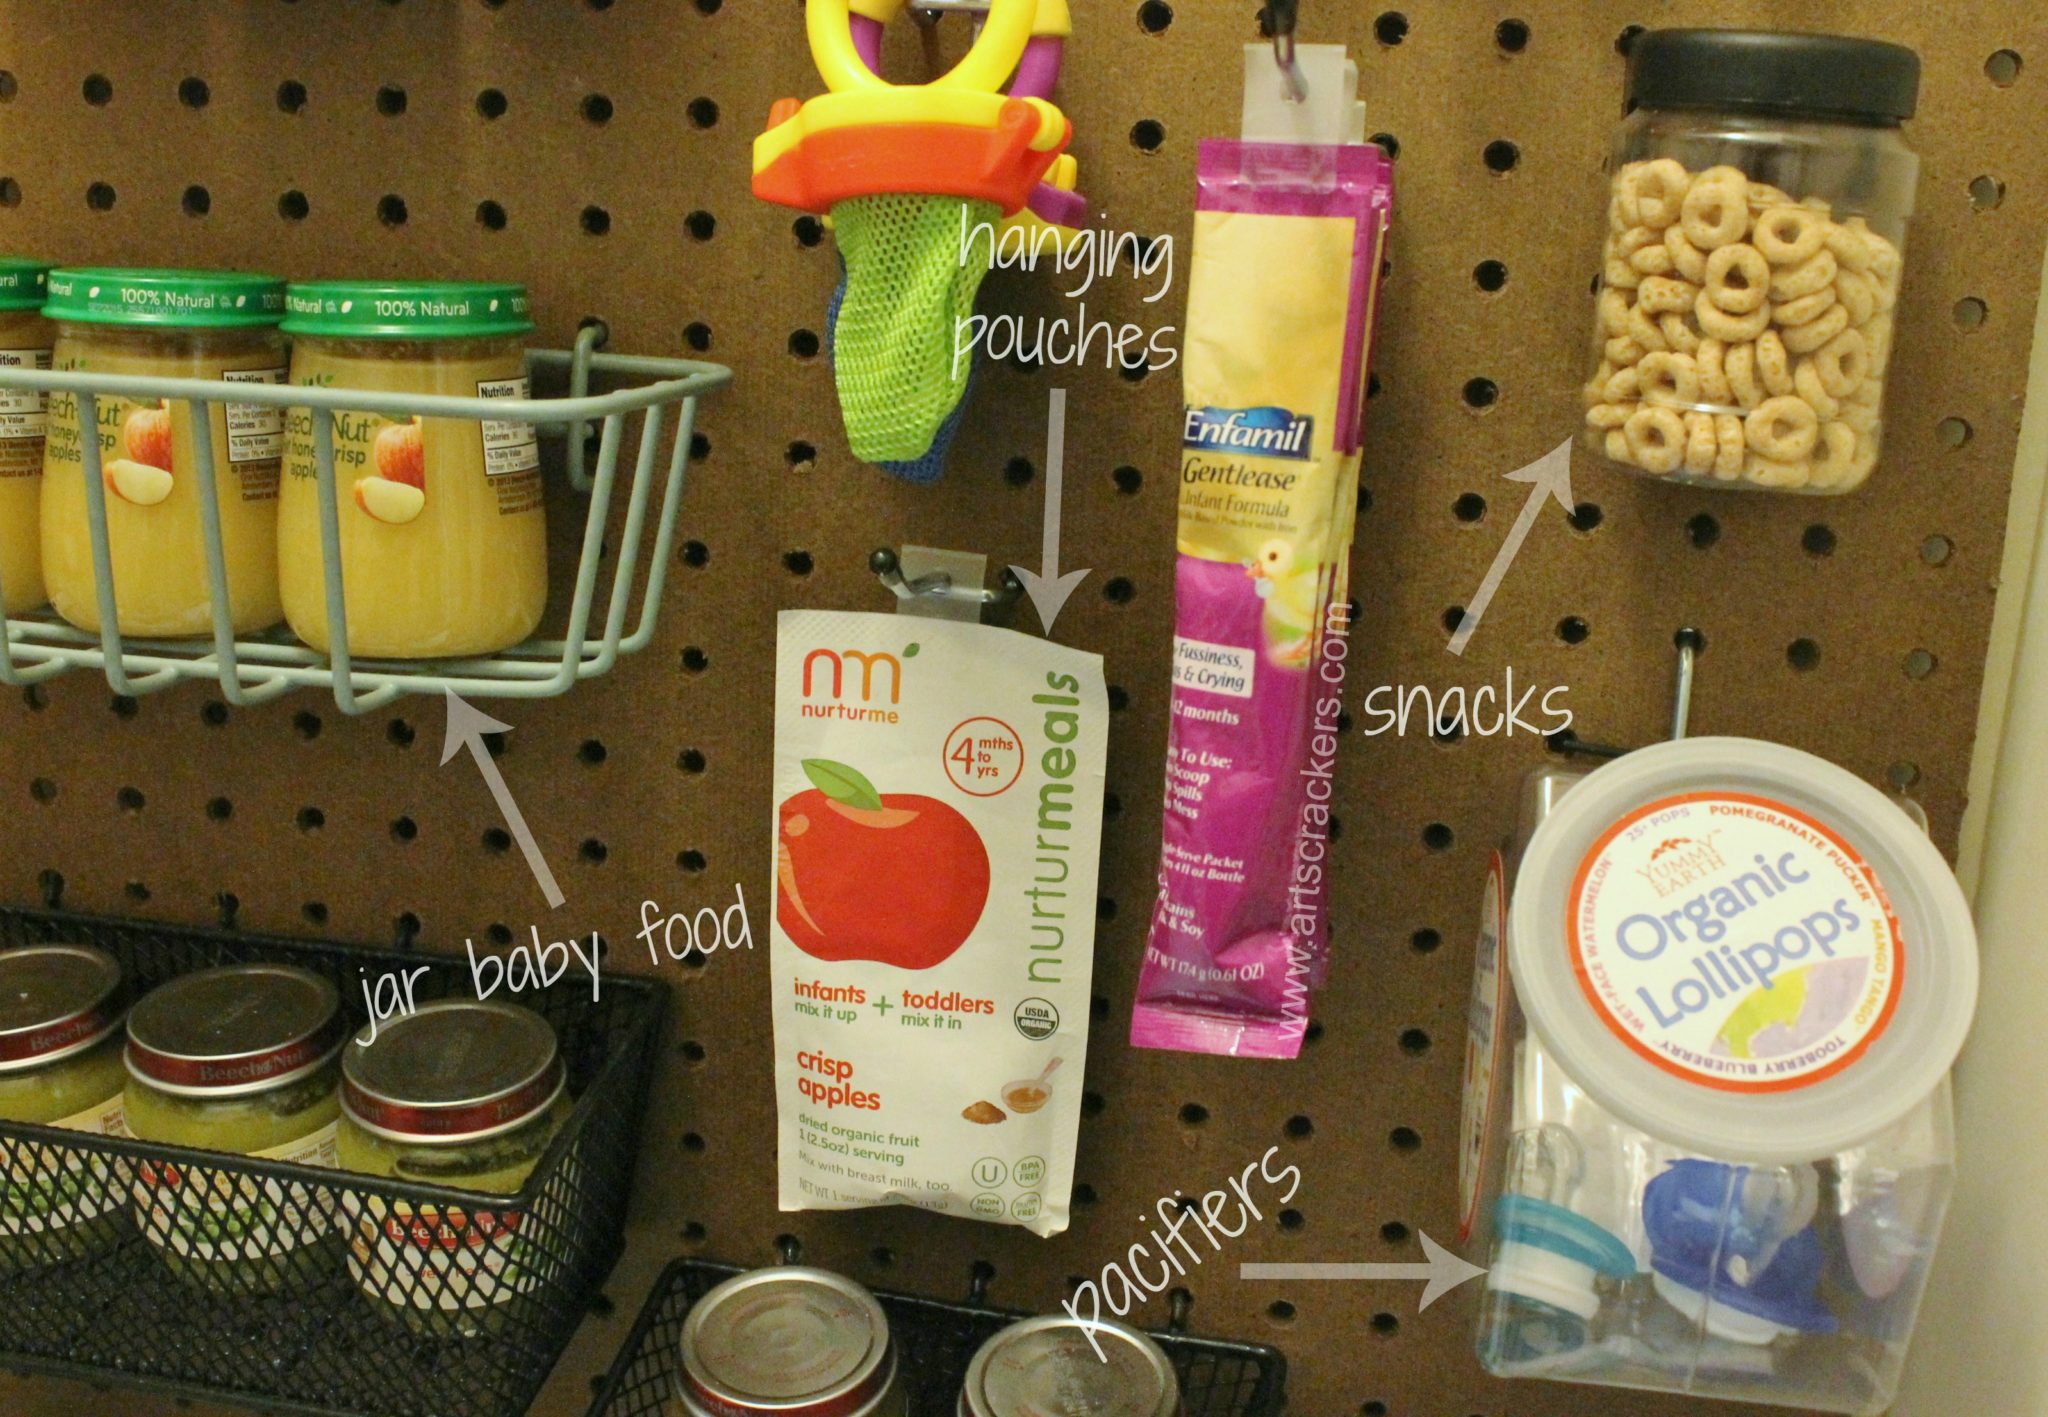 Pegboard Pantry Organizer labelled